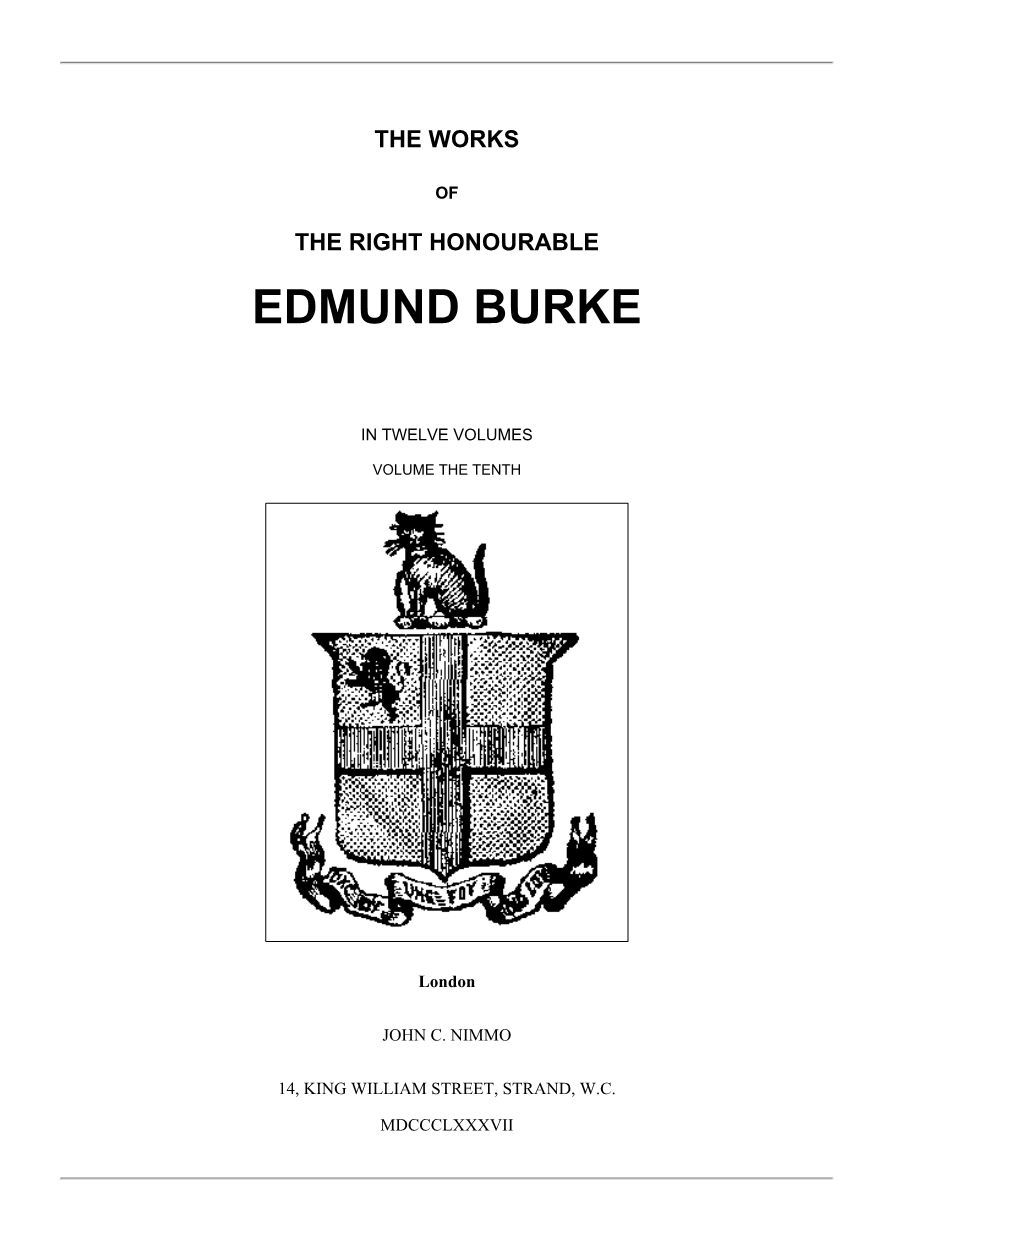 The Works of the Right Honourable Edmund Burke, Vol. X, by Edmund Burke